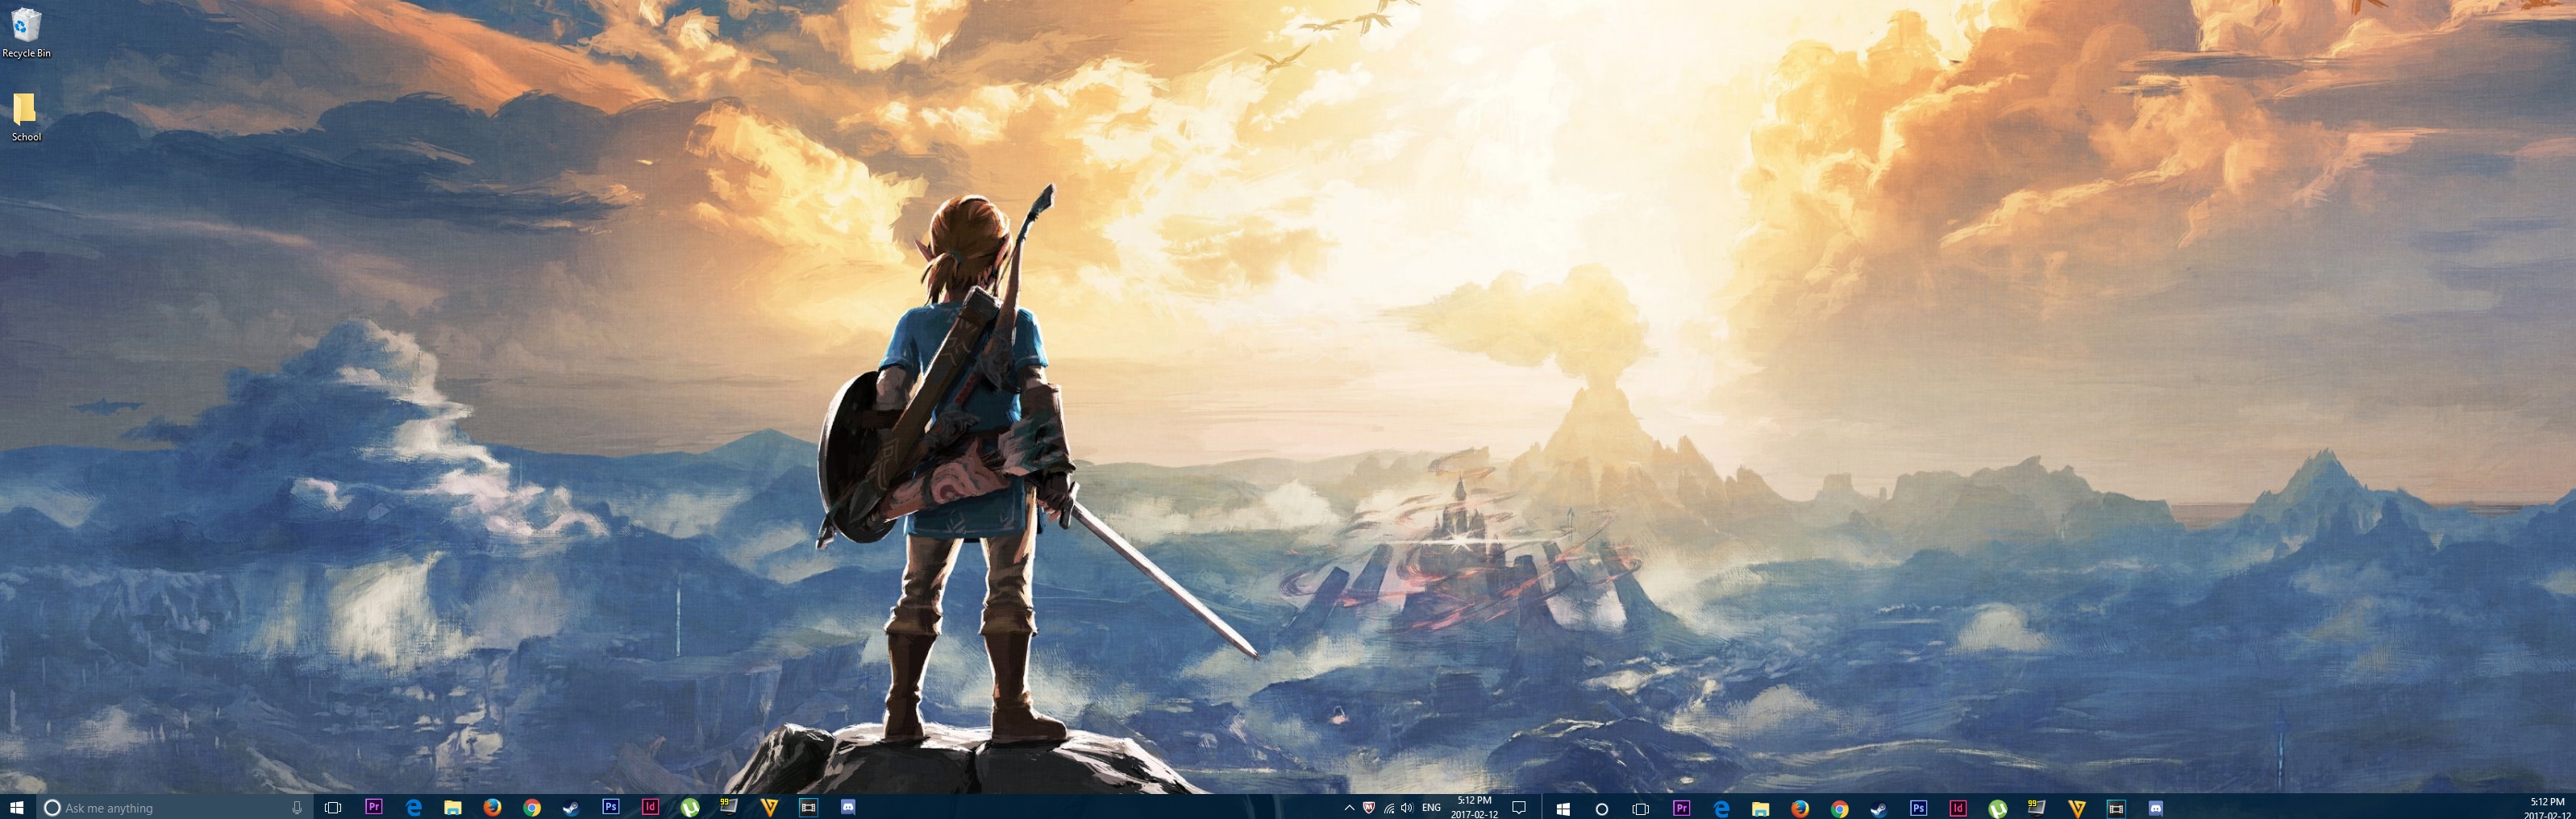 dual-monitor breath of the wild wallpaper looking pretty sweet